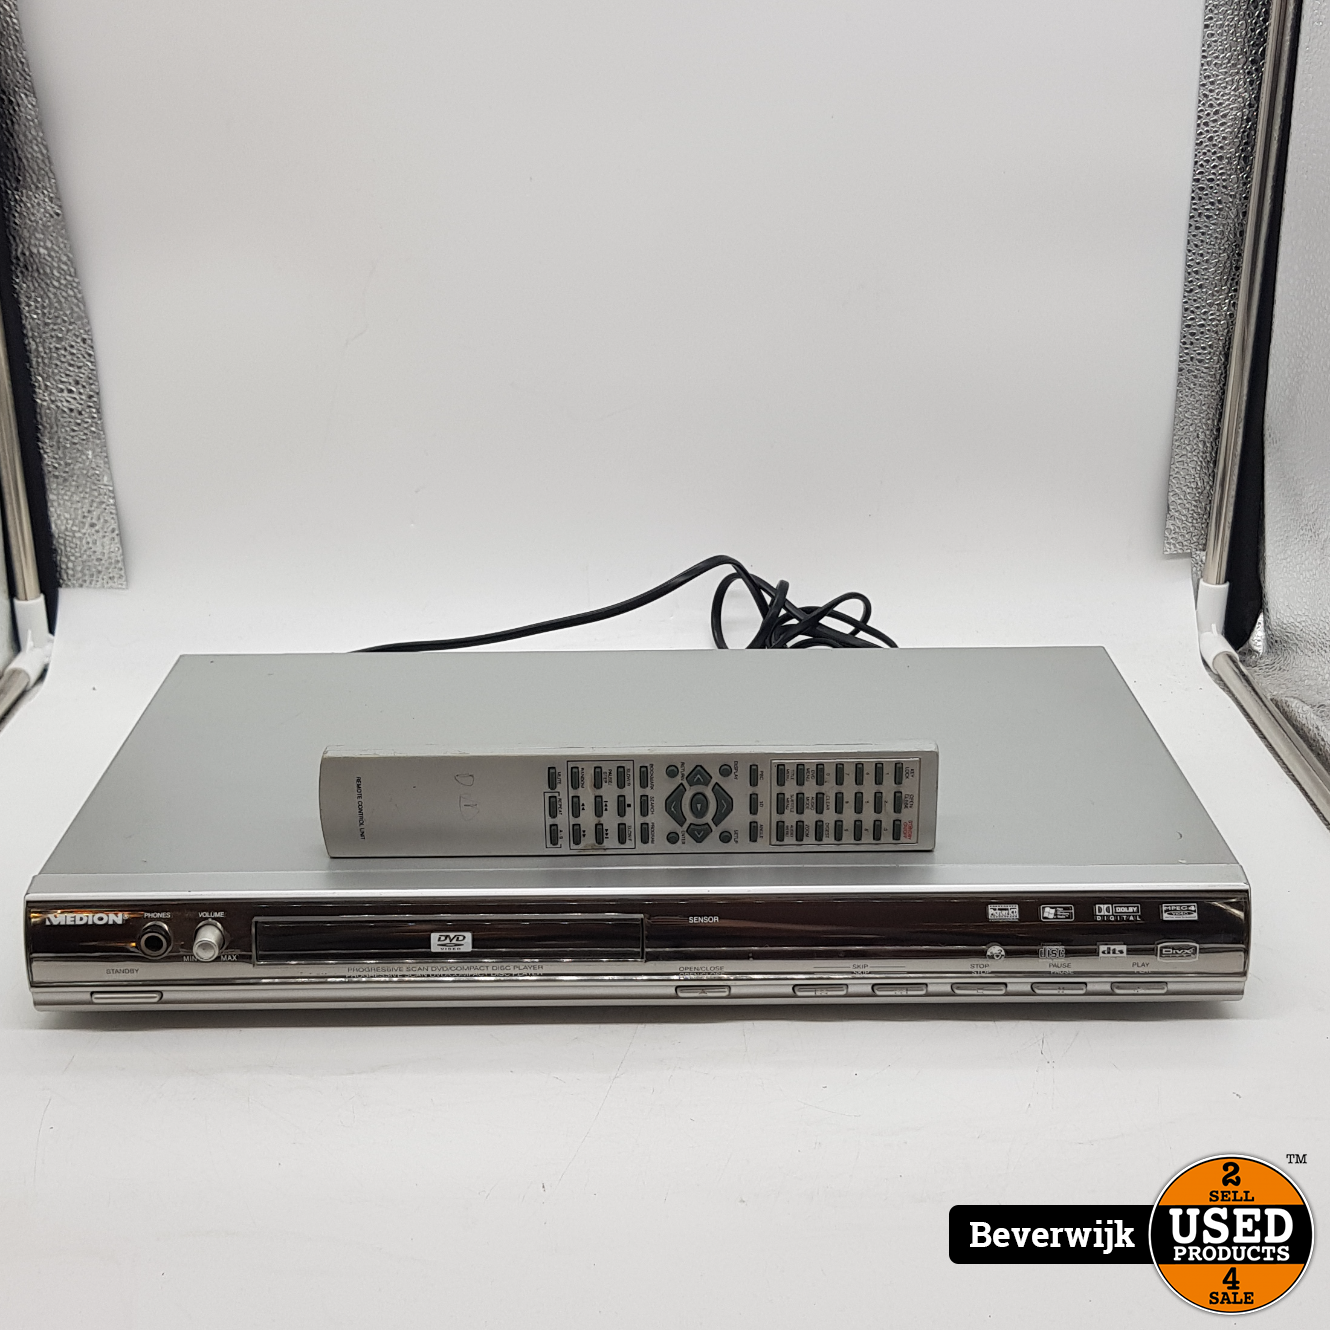 Wolk Lol laten vallen Medion MD7457 DVD Player - In Goede Staat - Used Products Beverwijk